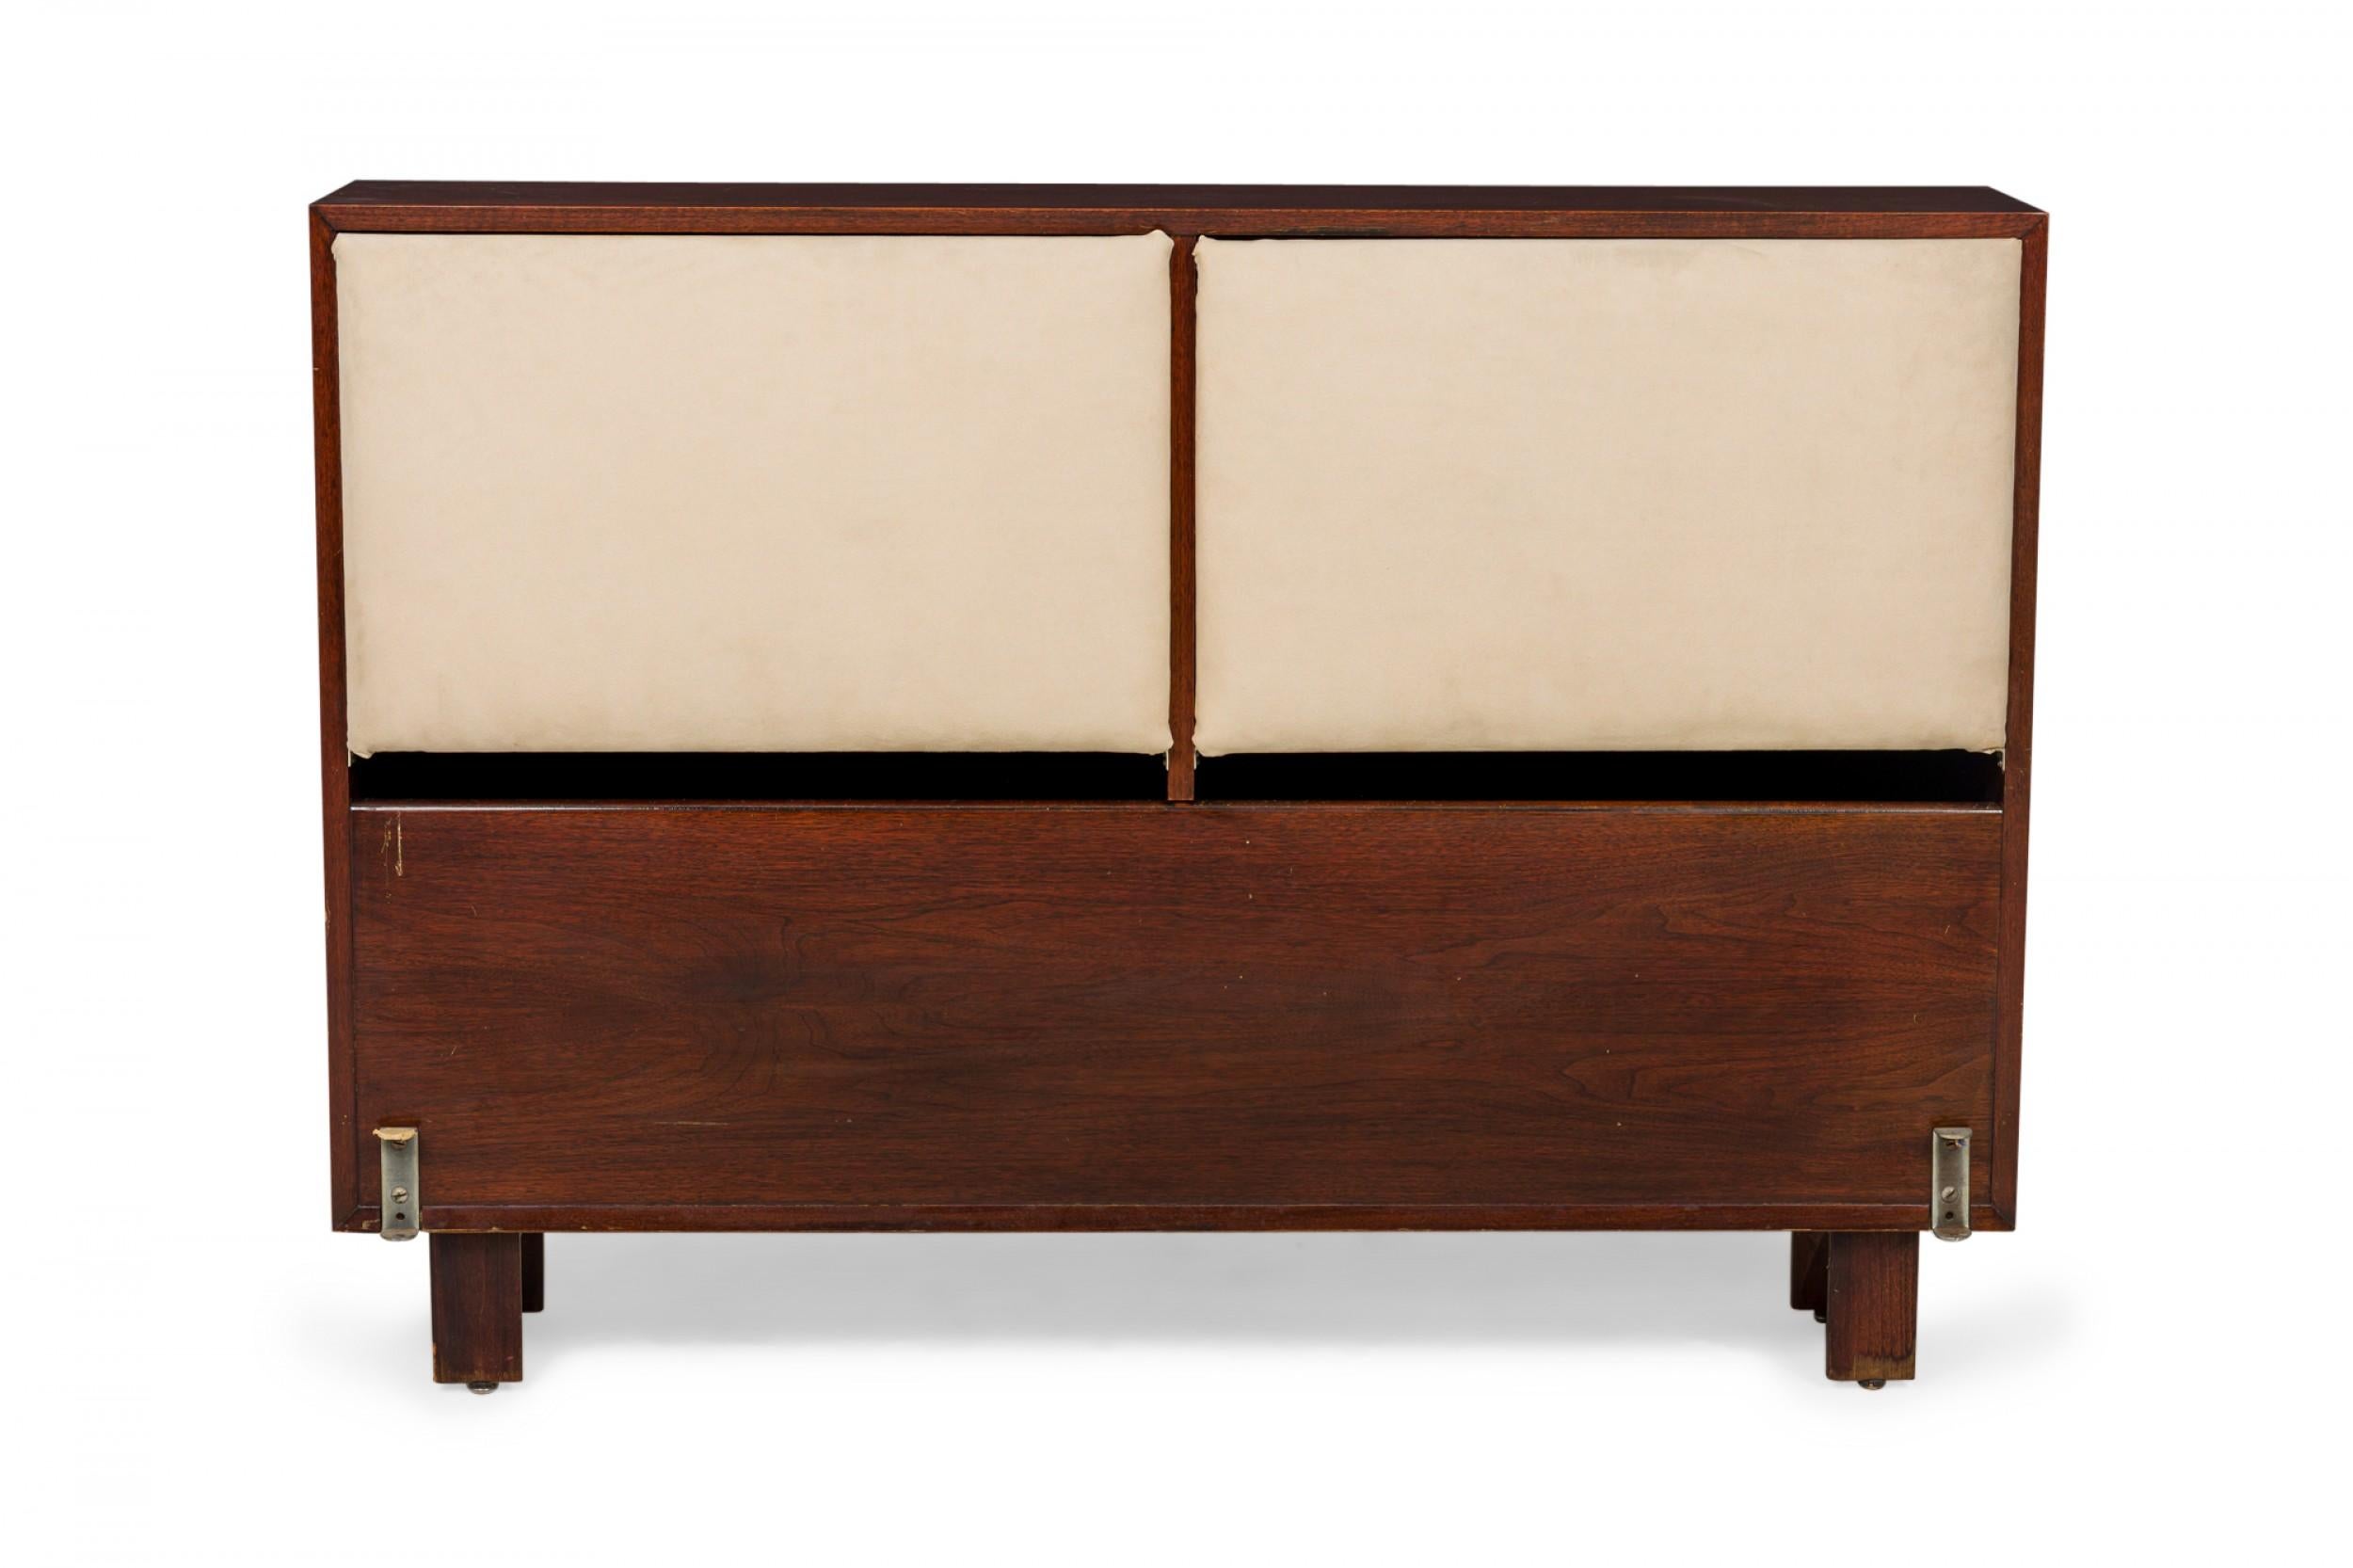 American Mid-Century double / full-sized bed headboard with a teak wood frame and two upholstered beige panels, resting on square wooden legs.
